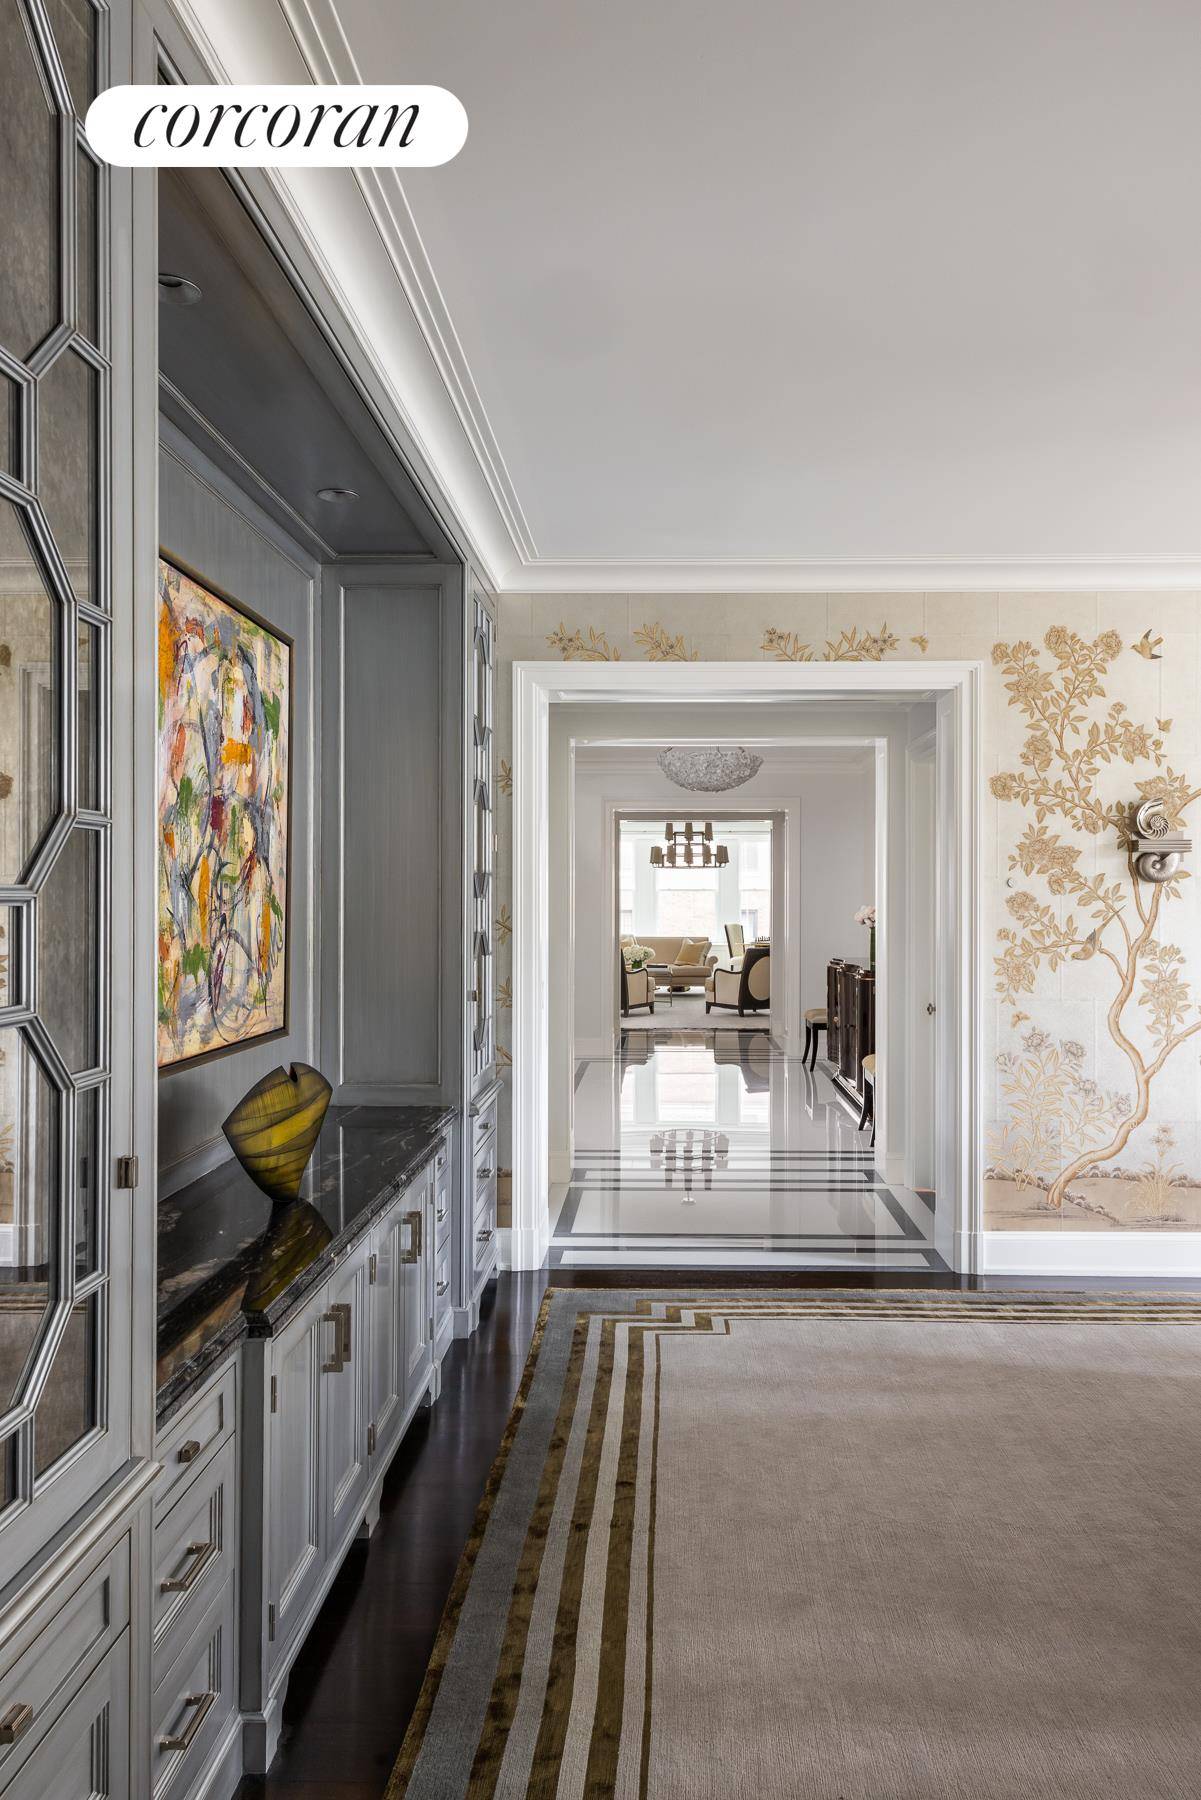 This stunning and luxurious prewar Park Avenue nine room home has been meticulously and beautifully designed by the award winning architect Oliver Cope, with Nordic Custom Builders, flawlessly executing the ...